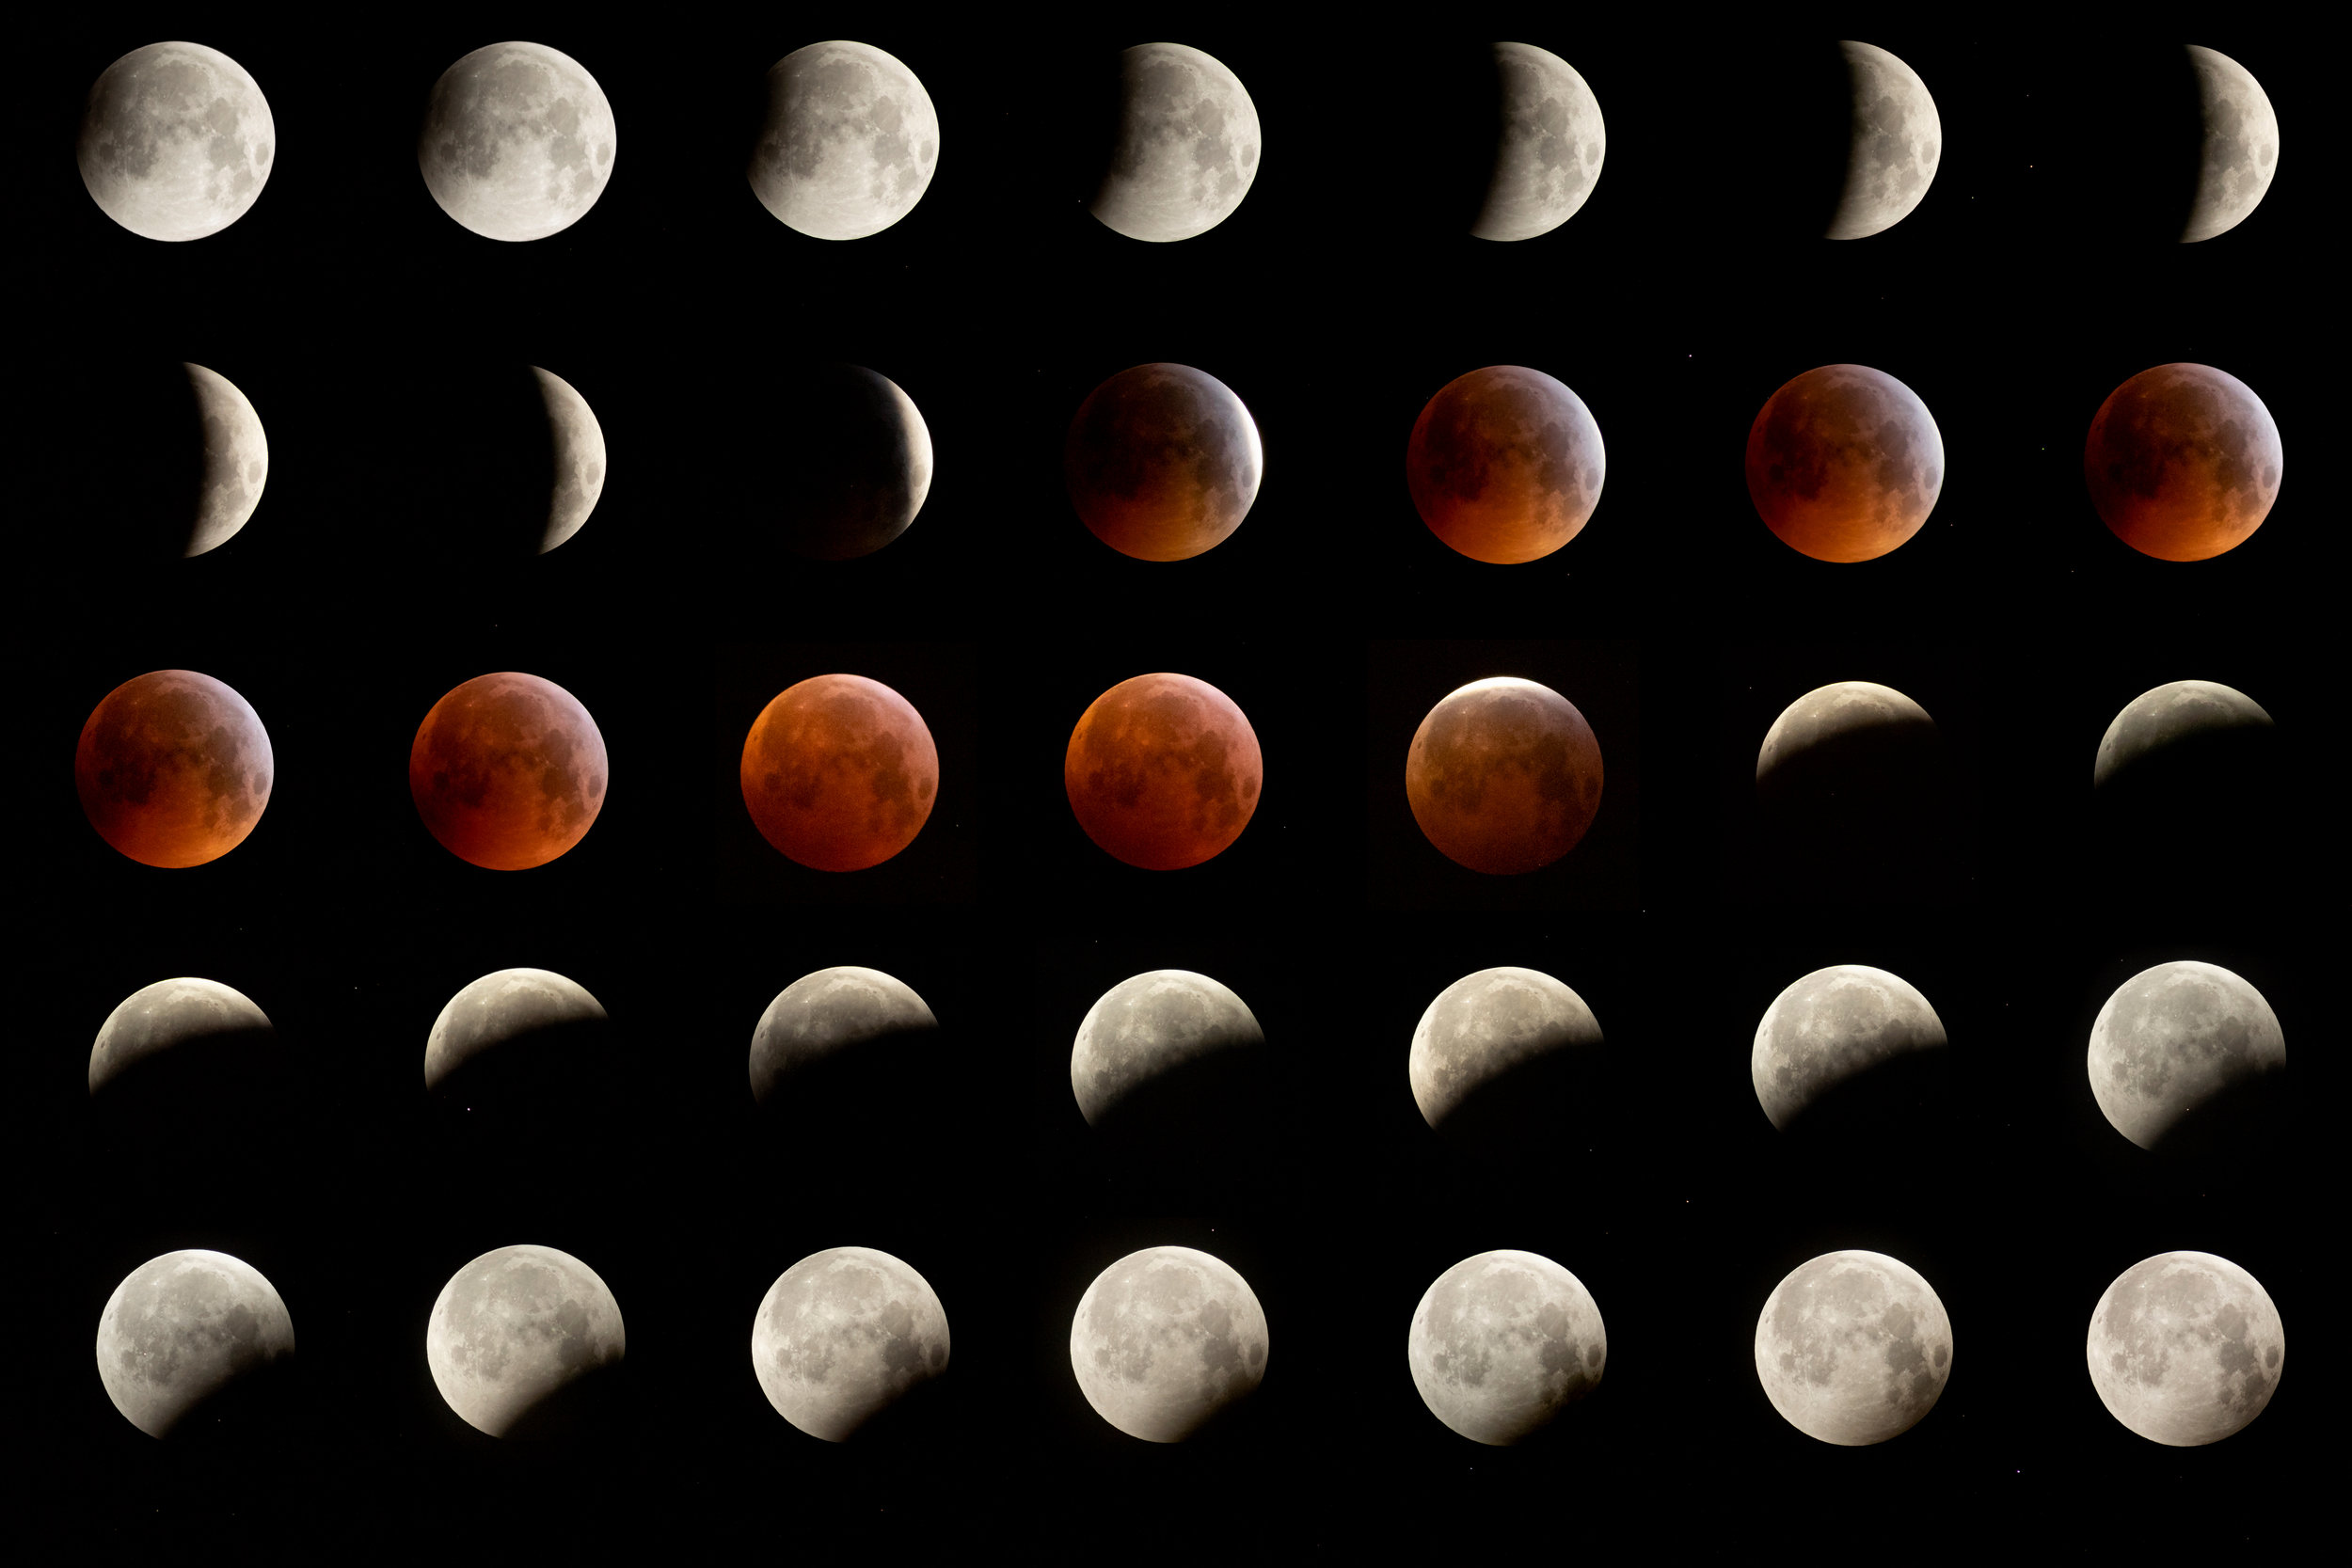  A composite image of a Super Blood Wolf Moon. Super due to its relative proximity to the Earth, Blood due to the colour caused by entering the Earth�s shadow and Wolf because it is January and Wolves howl due to hunger at this time of year.
Photo by